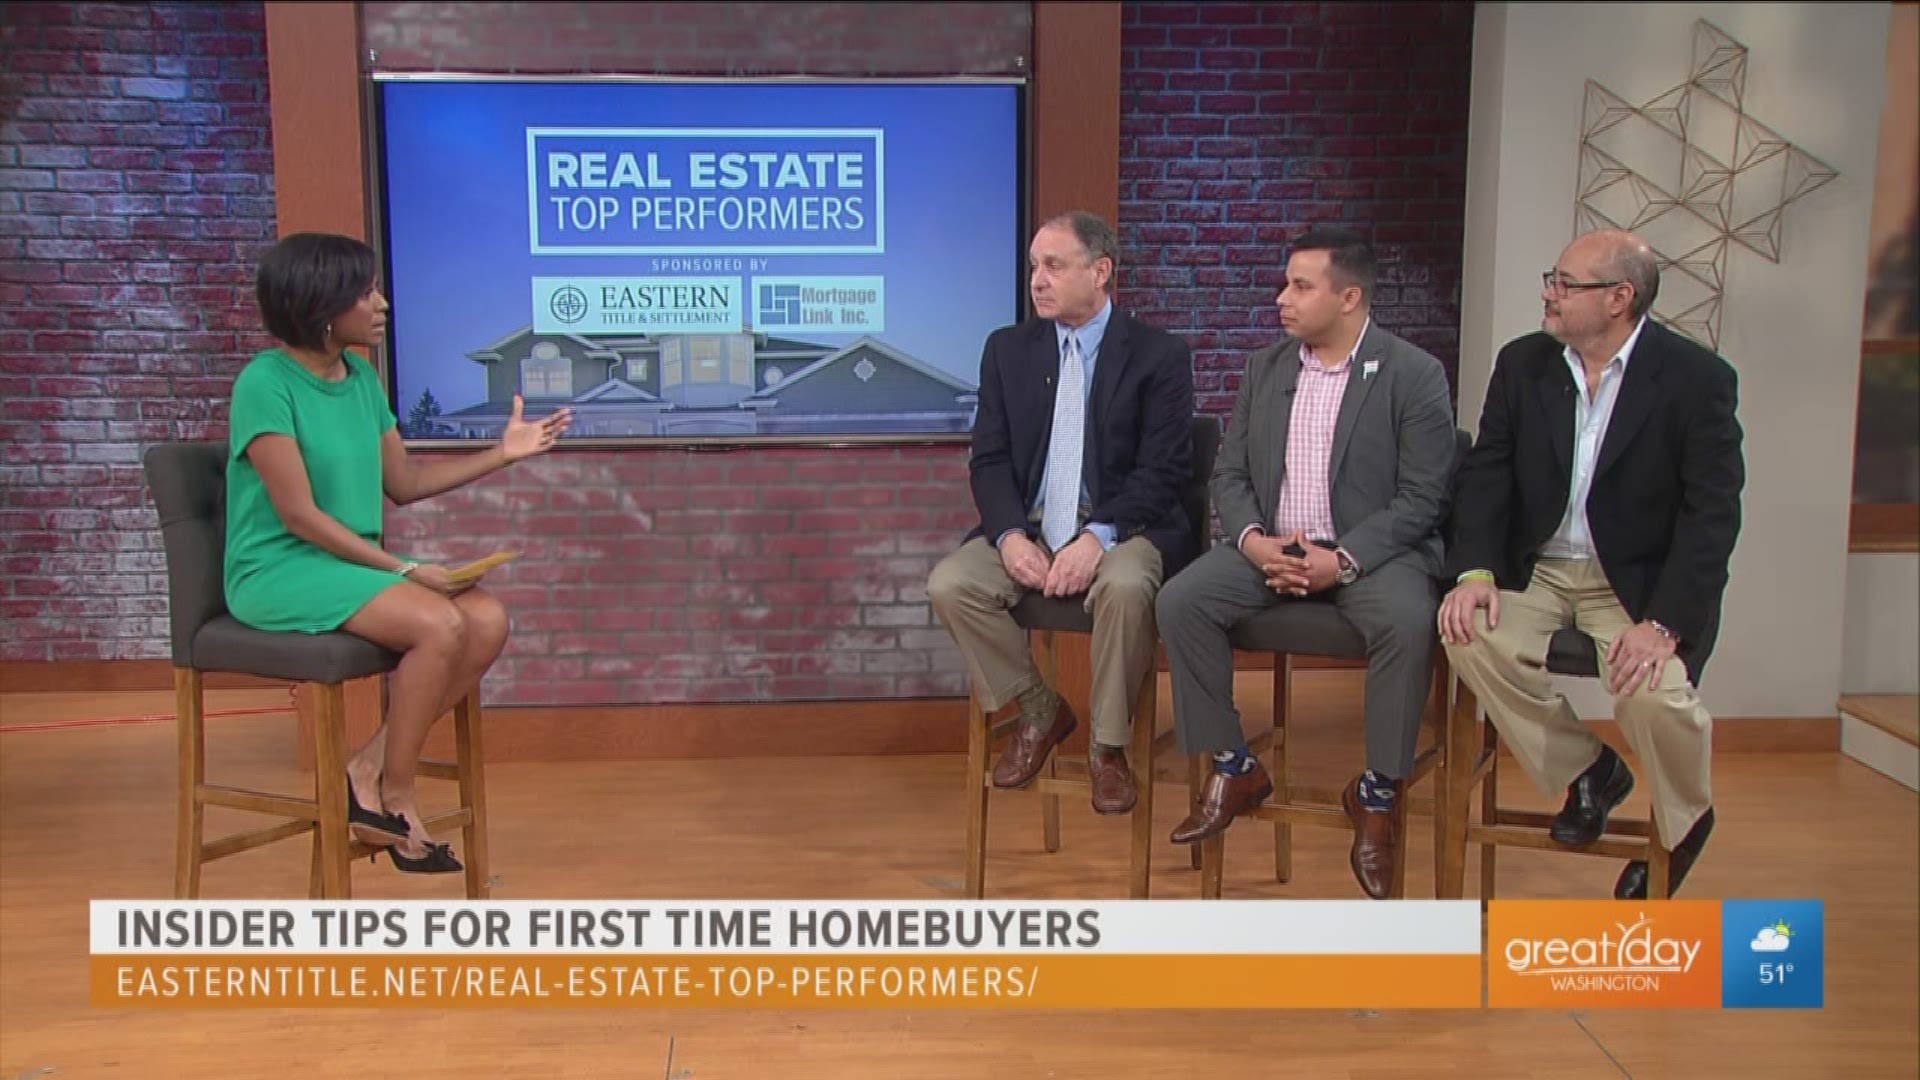 The Real Estate Top Performers are back with insider tips for first time homebuyers!  To get in touch with Ben Goldman of Eastern Title & Settlement, Mario Padilla of RE/MAX, and Carlos Winffel from The Mortgage Link visit EasternTitle.net/Real-Estate-Top-Performers/ or call (240) 422-8871.